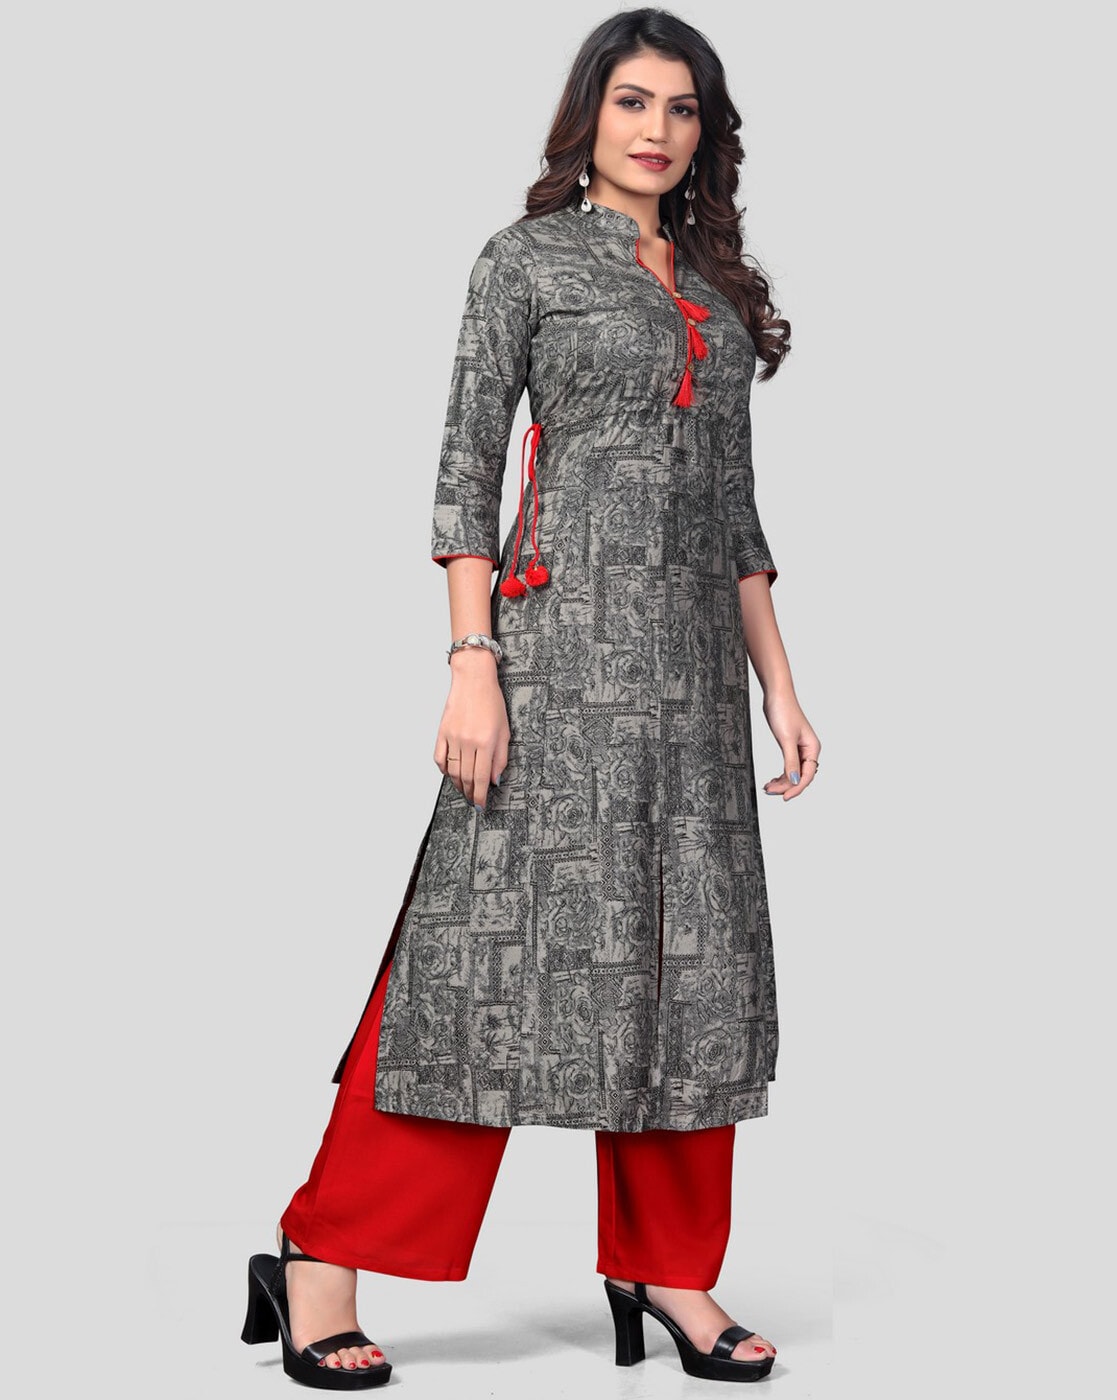 Women's Handloom Cotton A-Line Kurti with Blue Pant in Singrauli at best  price by Rubia Textile - Justdial